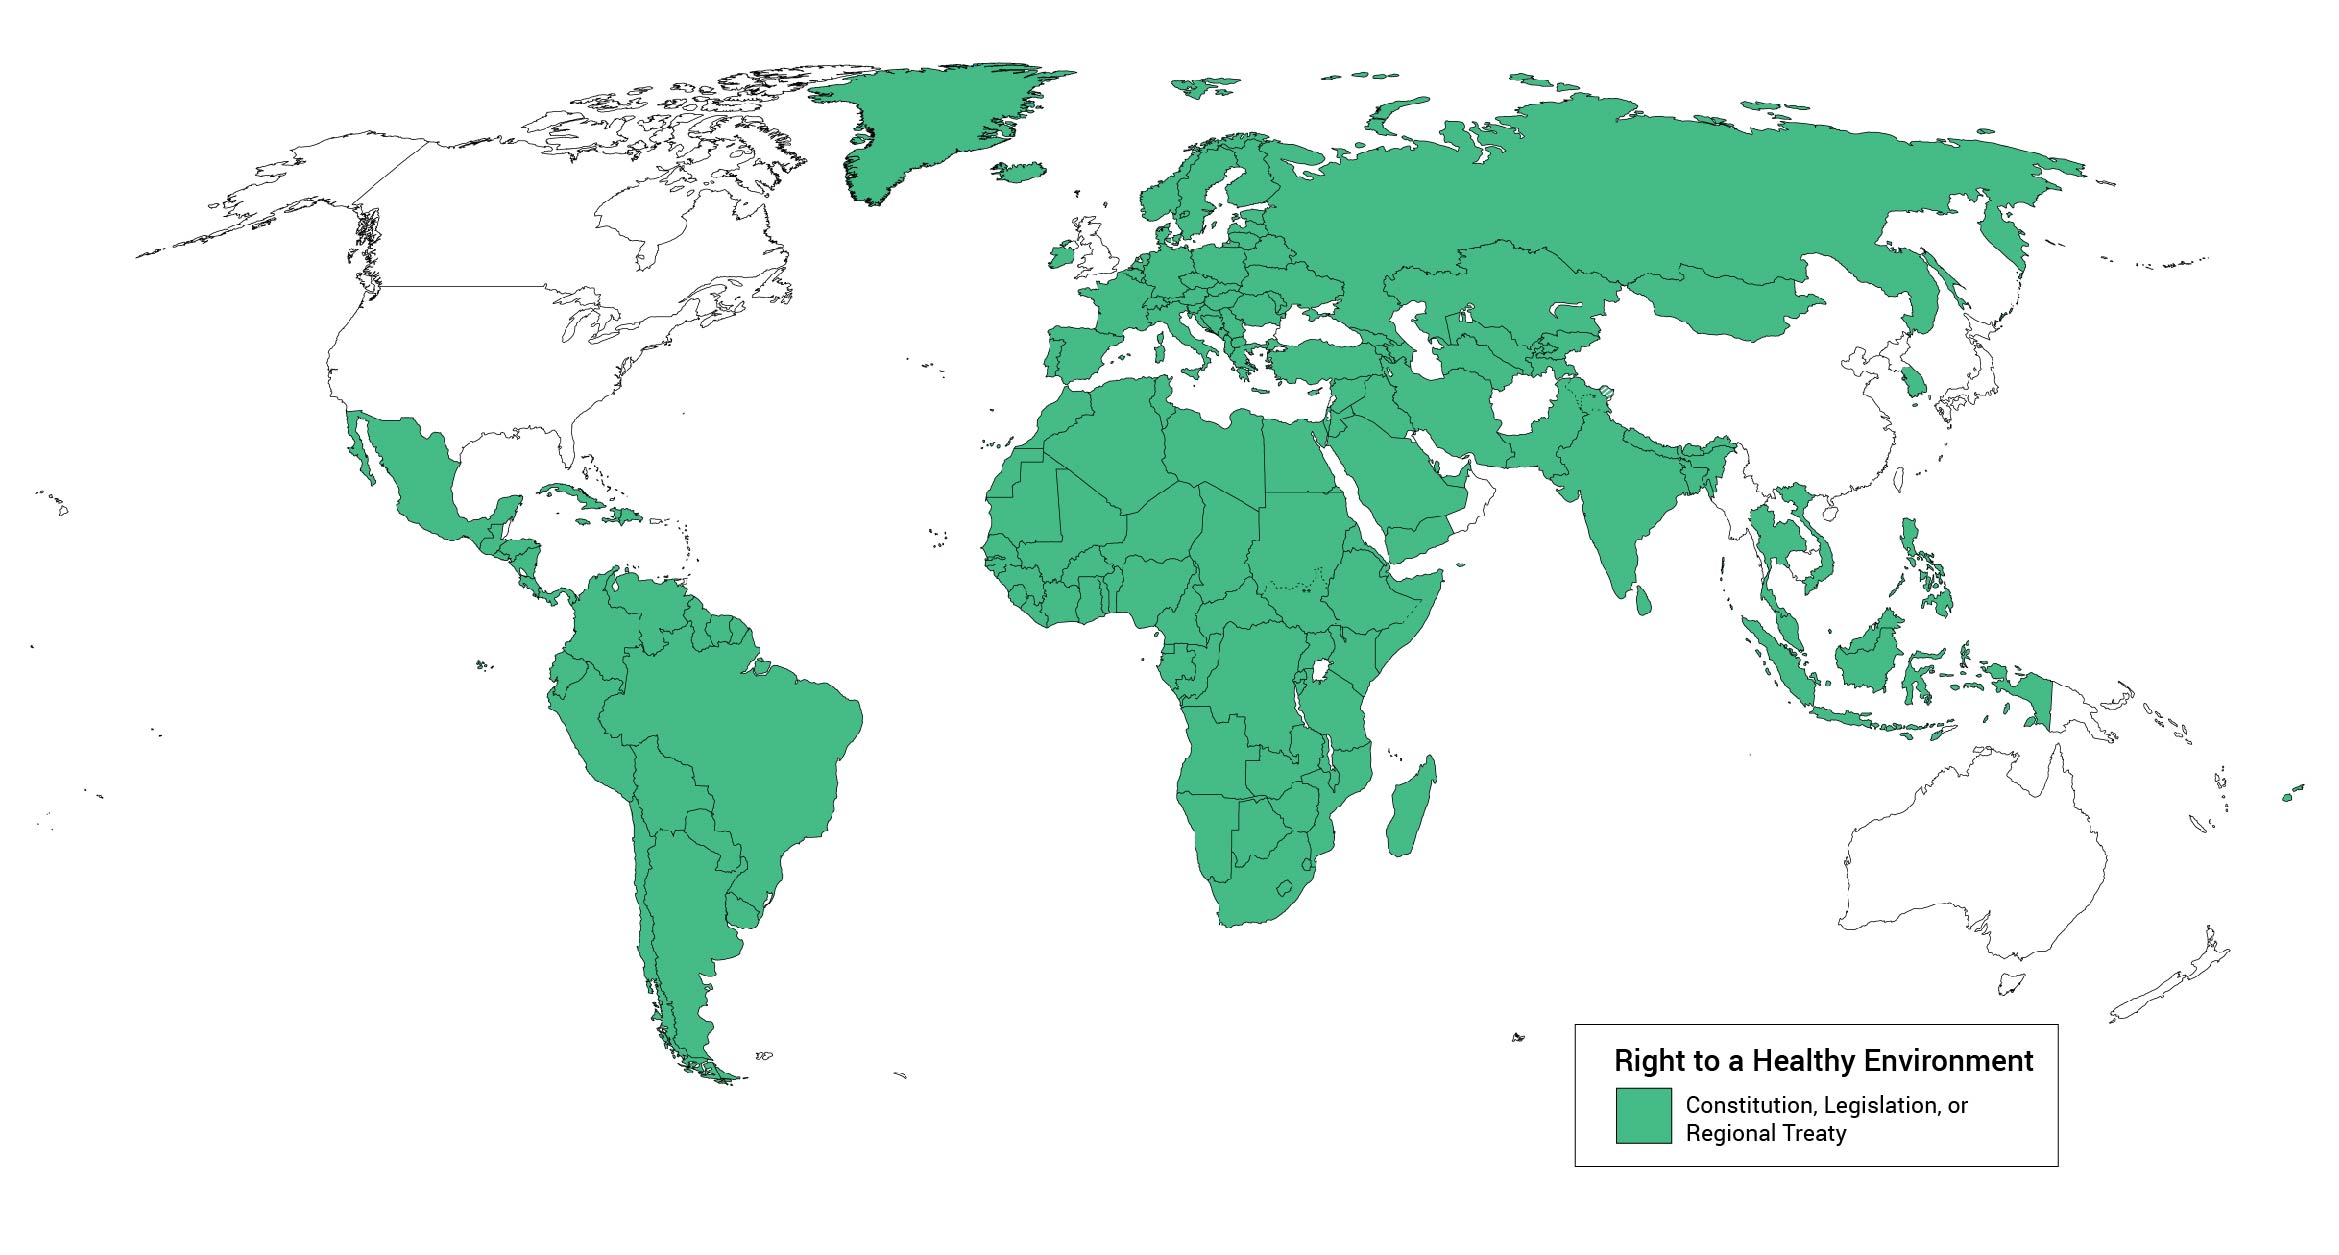 map that shows countries that have regulations for right to healthy environment created by Nawon Song